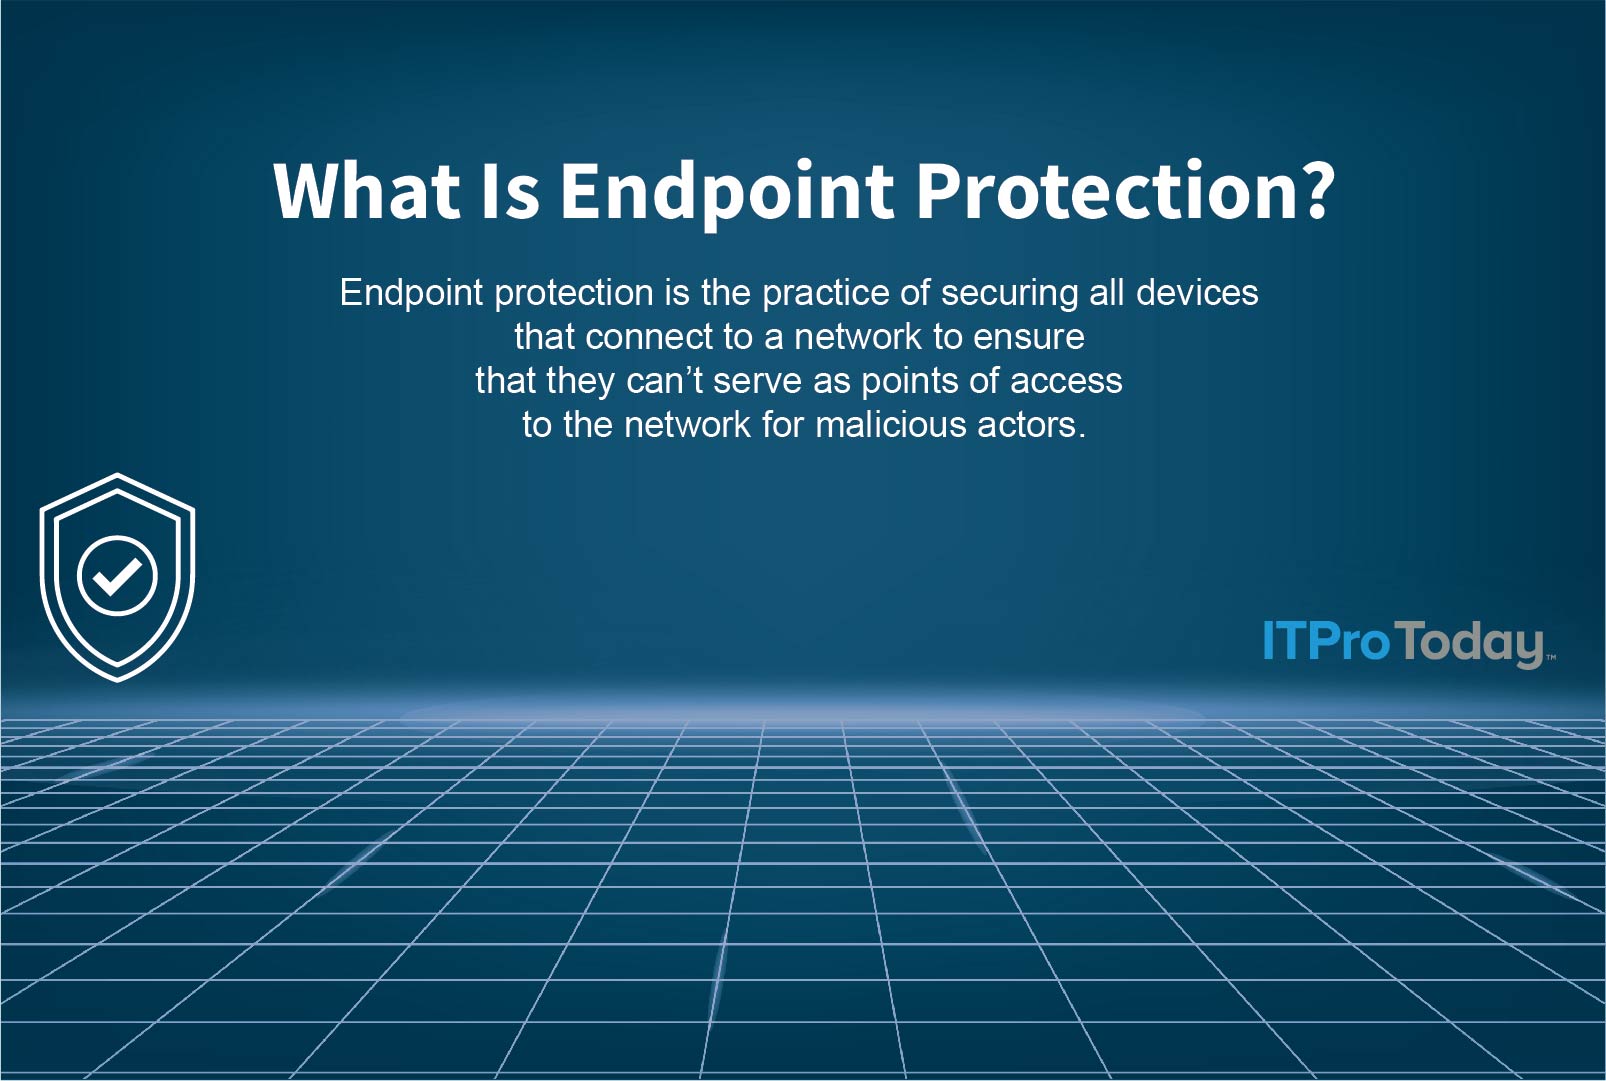 Endpoint protection definition displayed on ITPro Today